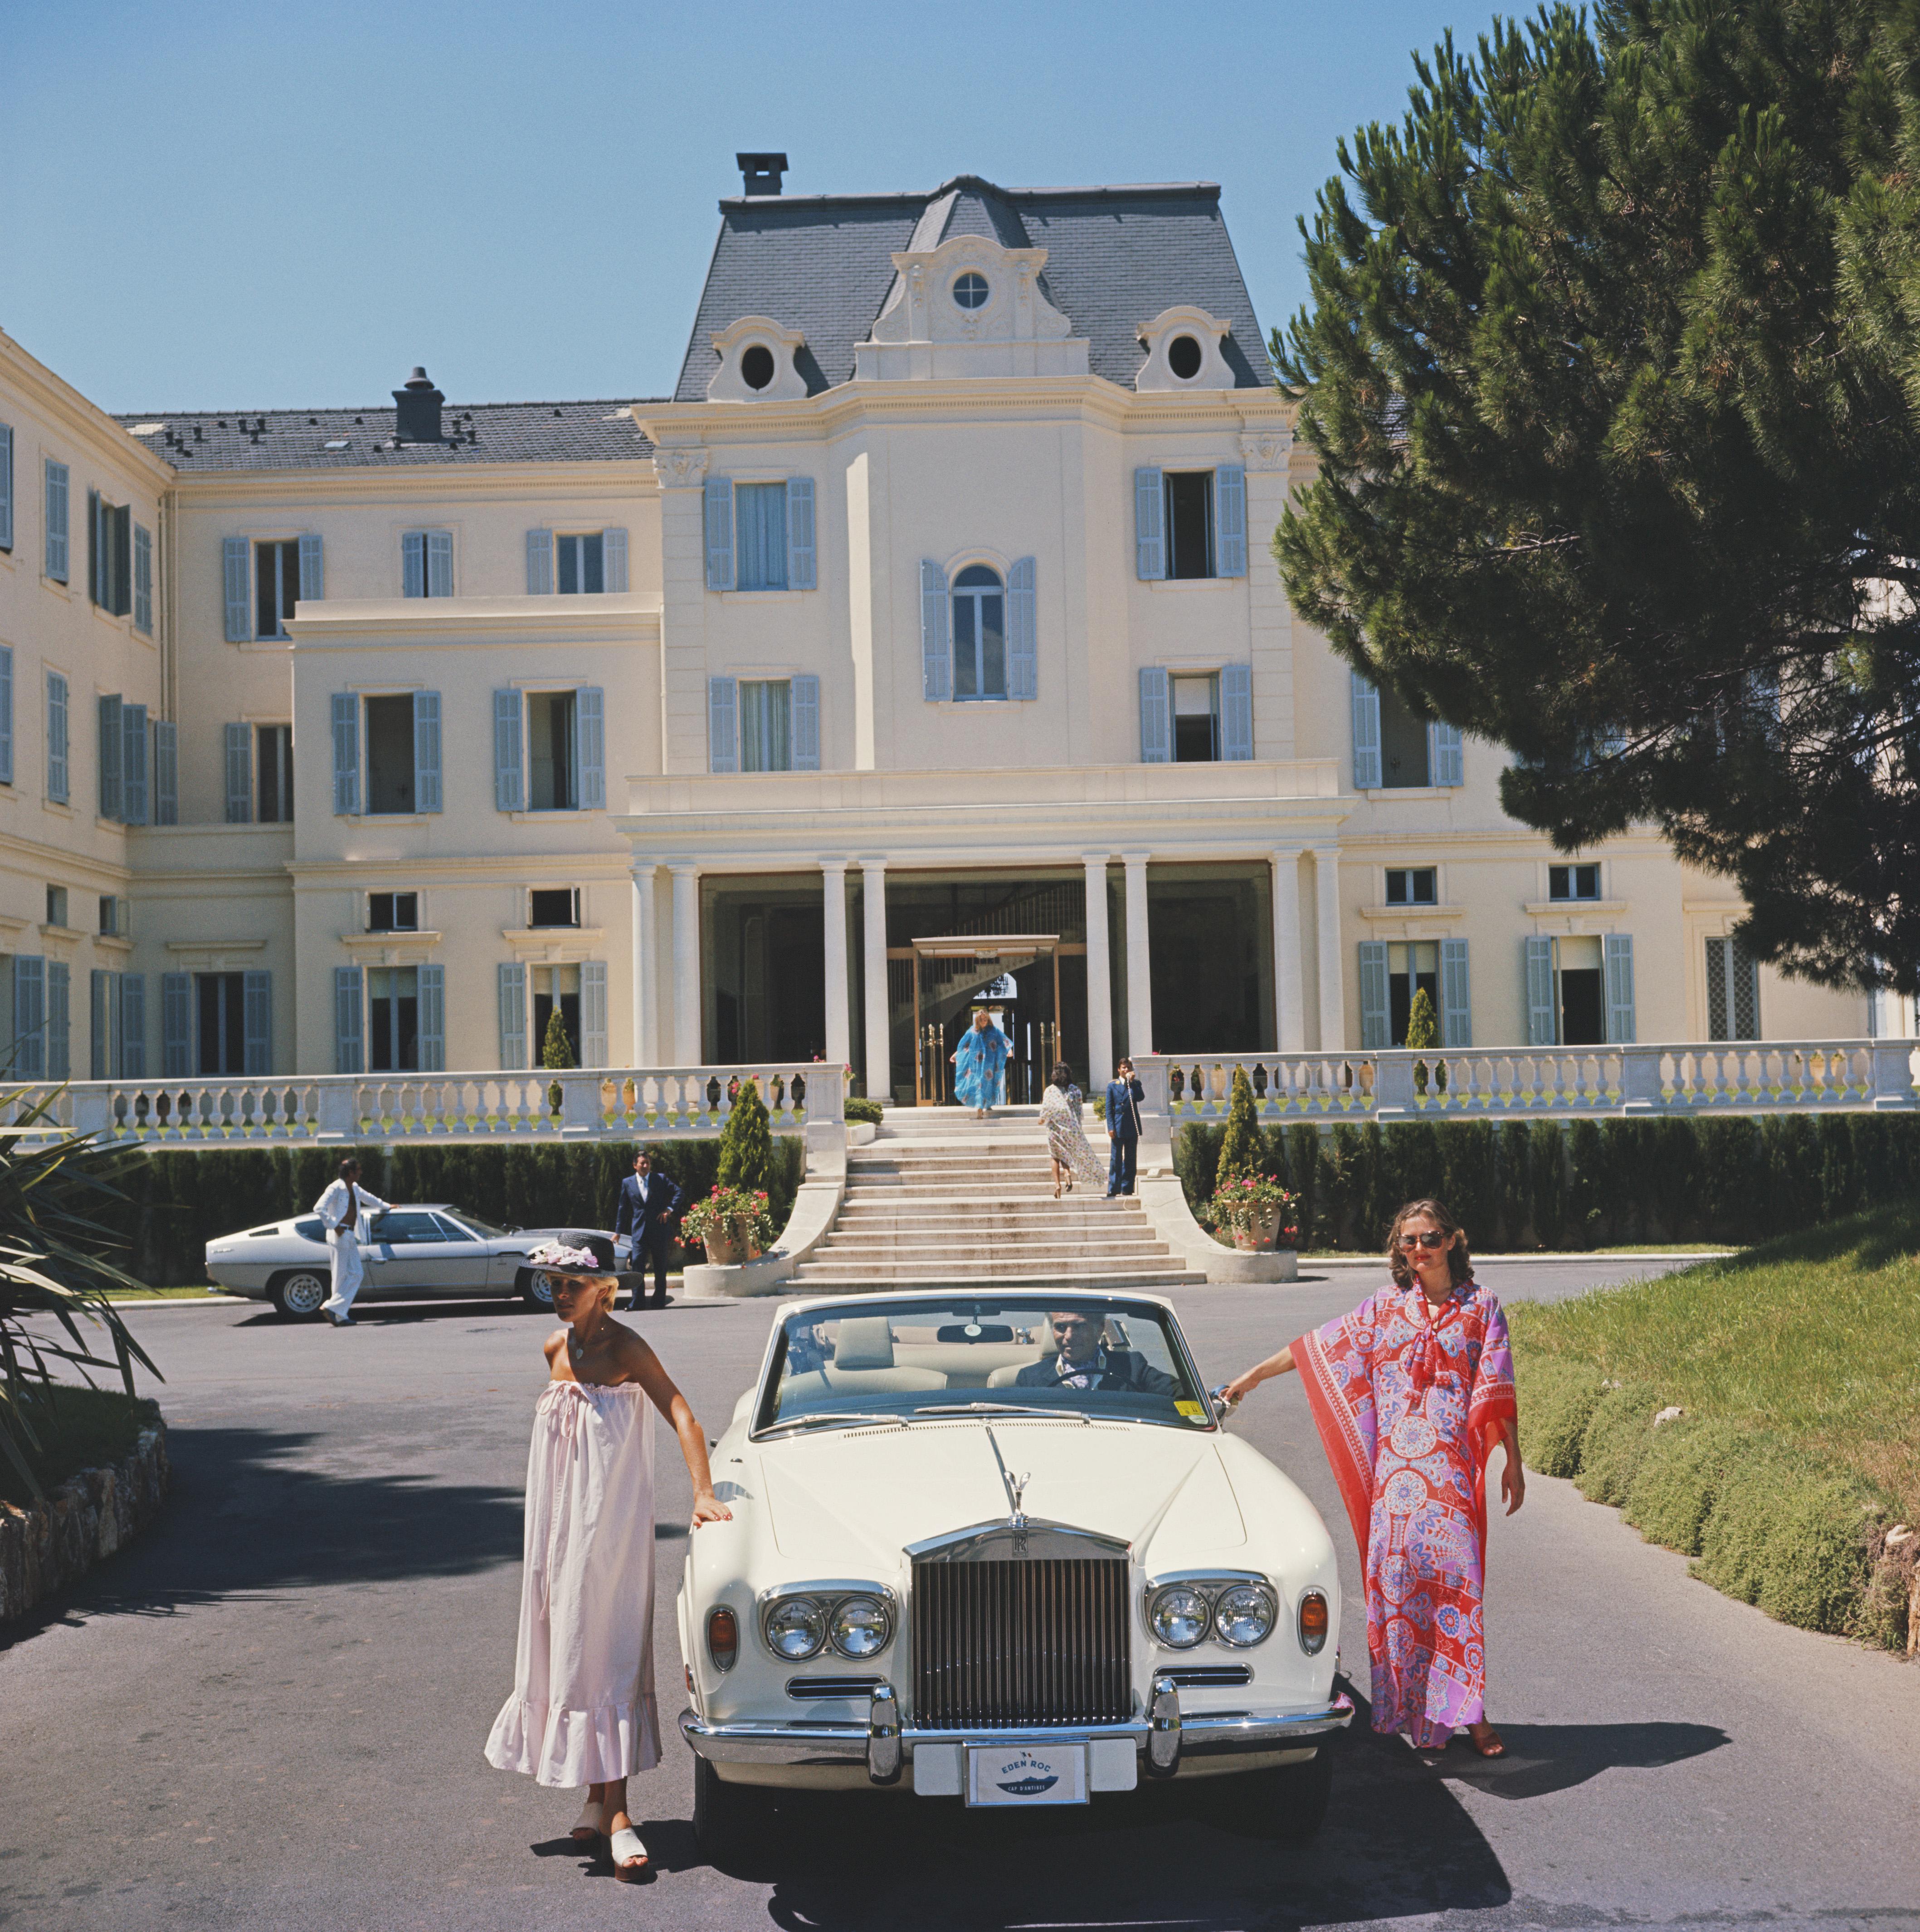 'Hotel du Cap Eden-Roc' Slim Aarons - Limited Edition Estate Stamped Print

Guests standing by a white Rolls-Royce convertible courtesy car at the Hotel du Cap Eden-Roc, Antibes, France, August 1976. 

Produced from the original